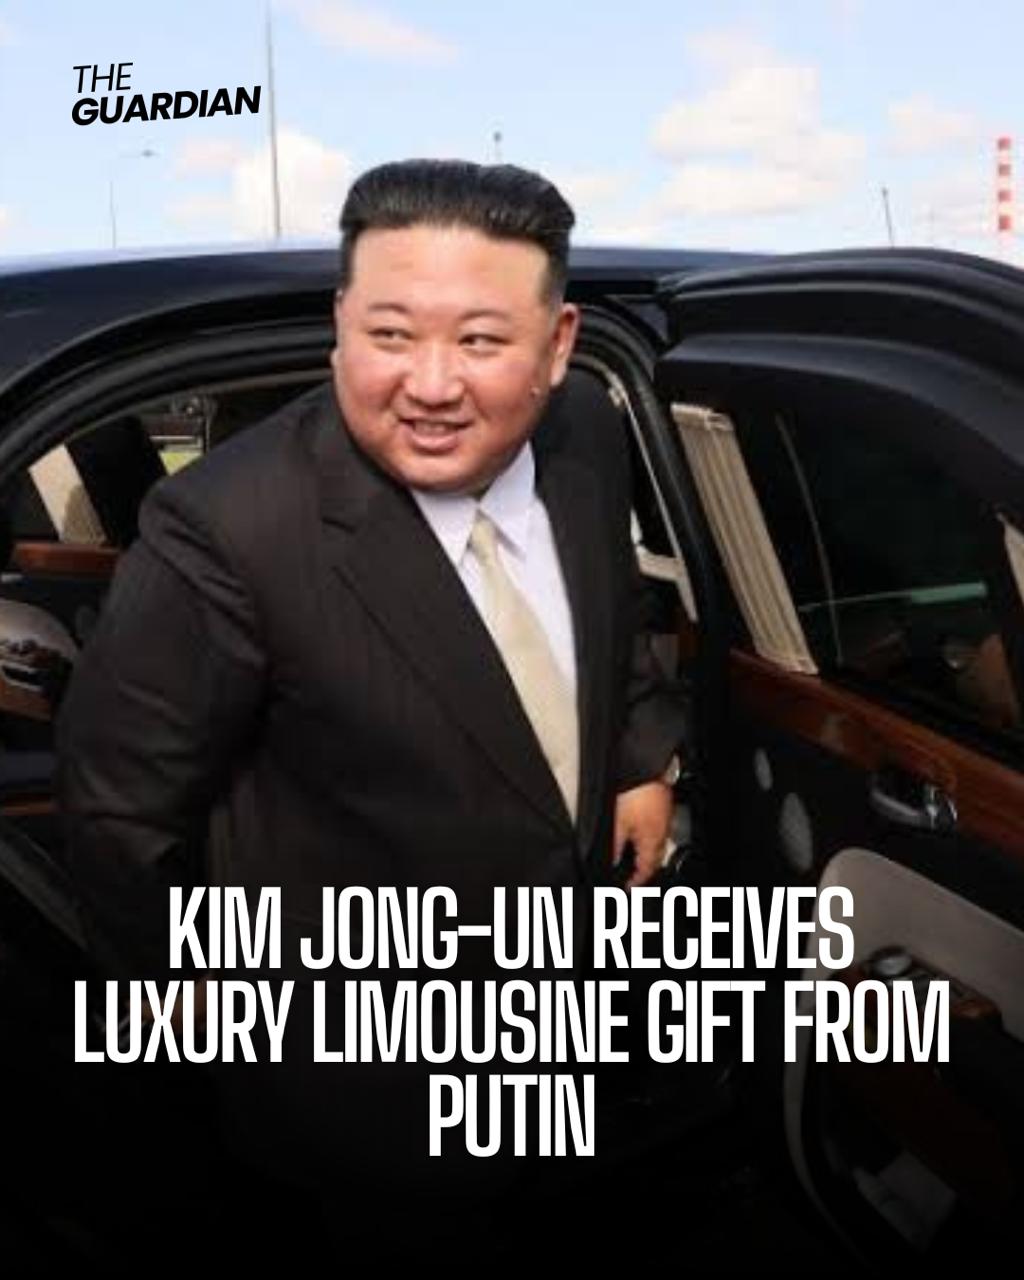 Russian President Vladimir Putin presented North Korean leader Kim Jong Un with a lavish Russian car, leaving no doubt about the generosity of the gift.